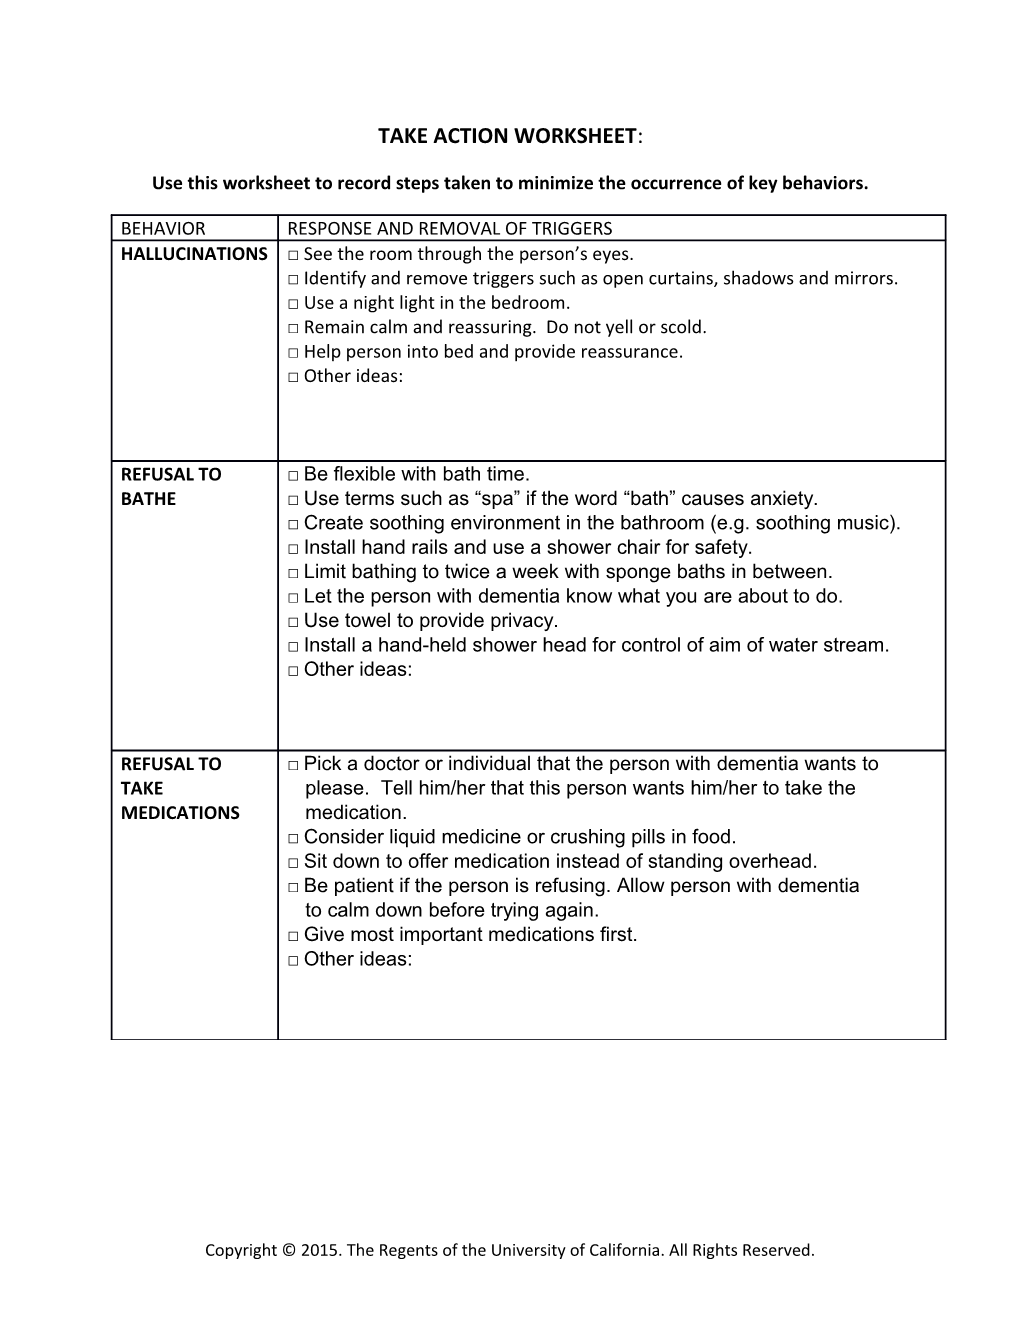 Use This Worksheet to Record Steps Taken to Minimize the Occurrence of Key Behaviors